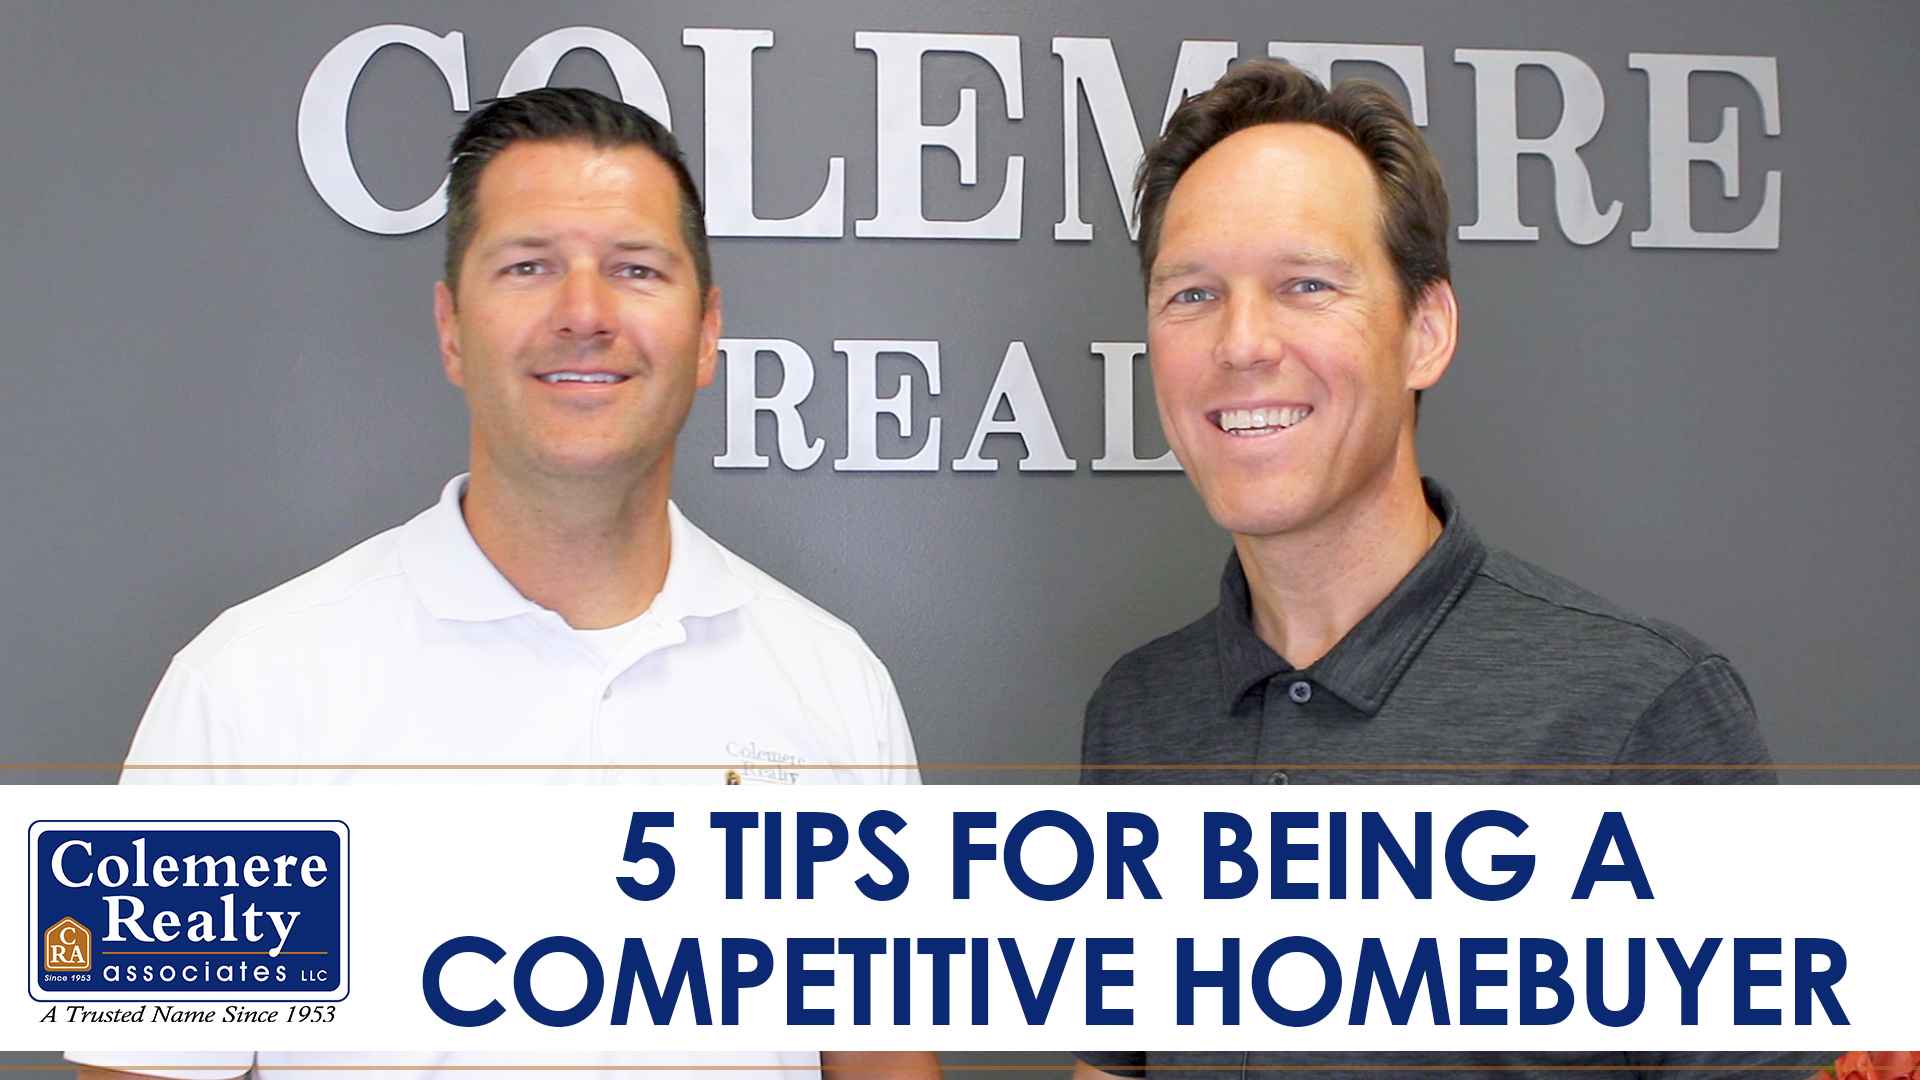 How Can Homebuyers Stay Competitive in Our Market?